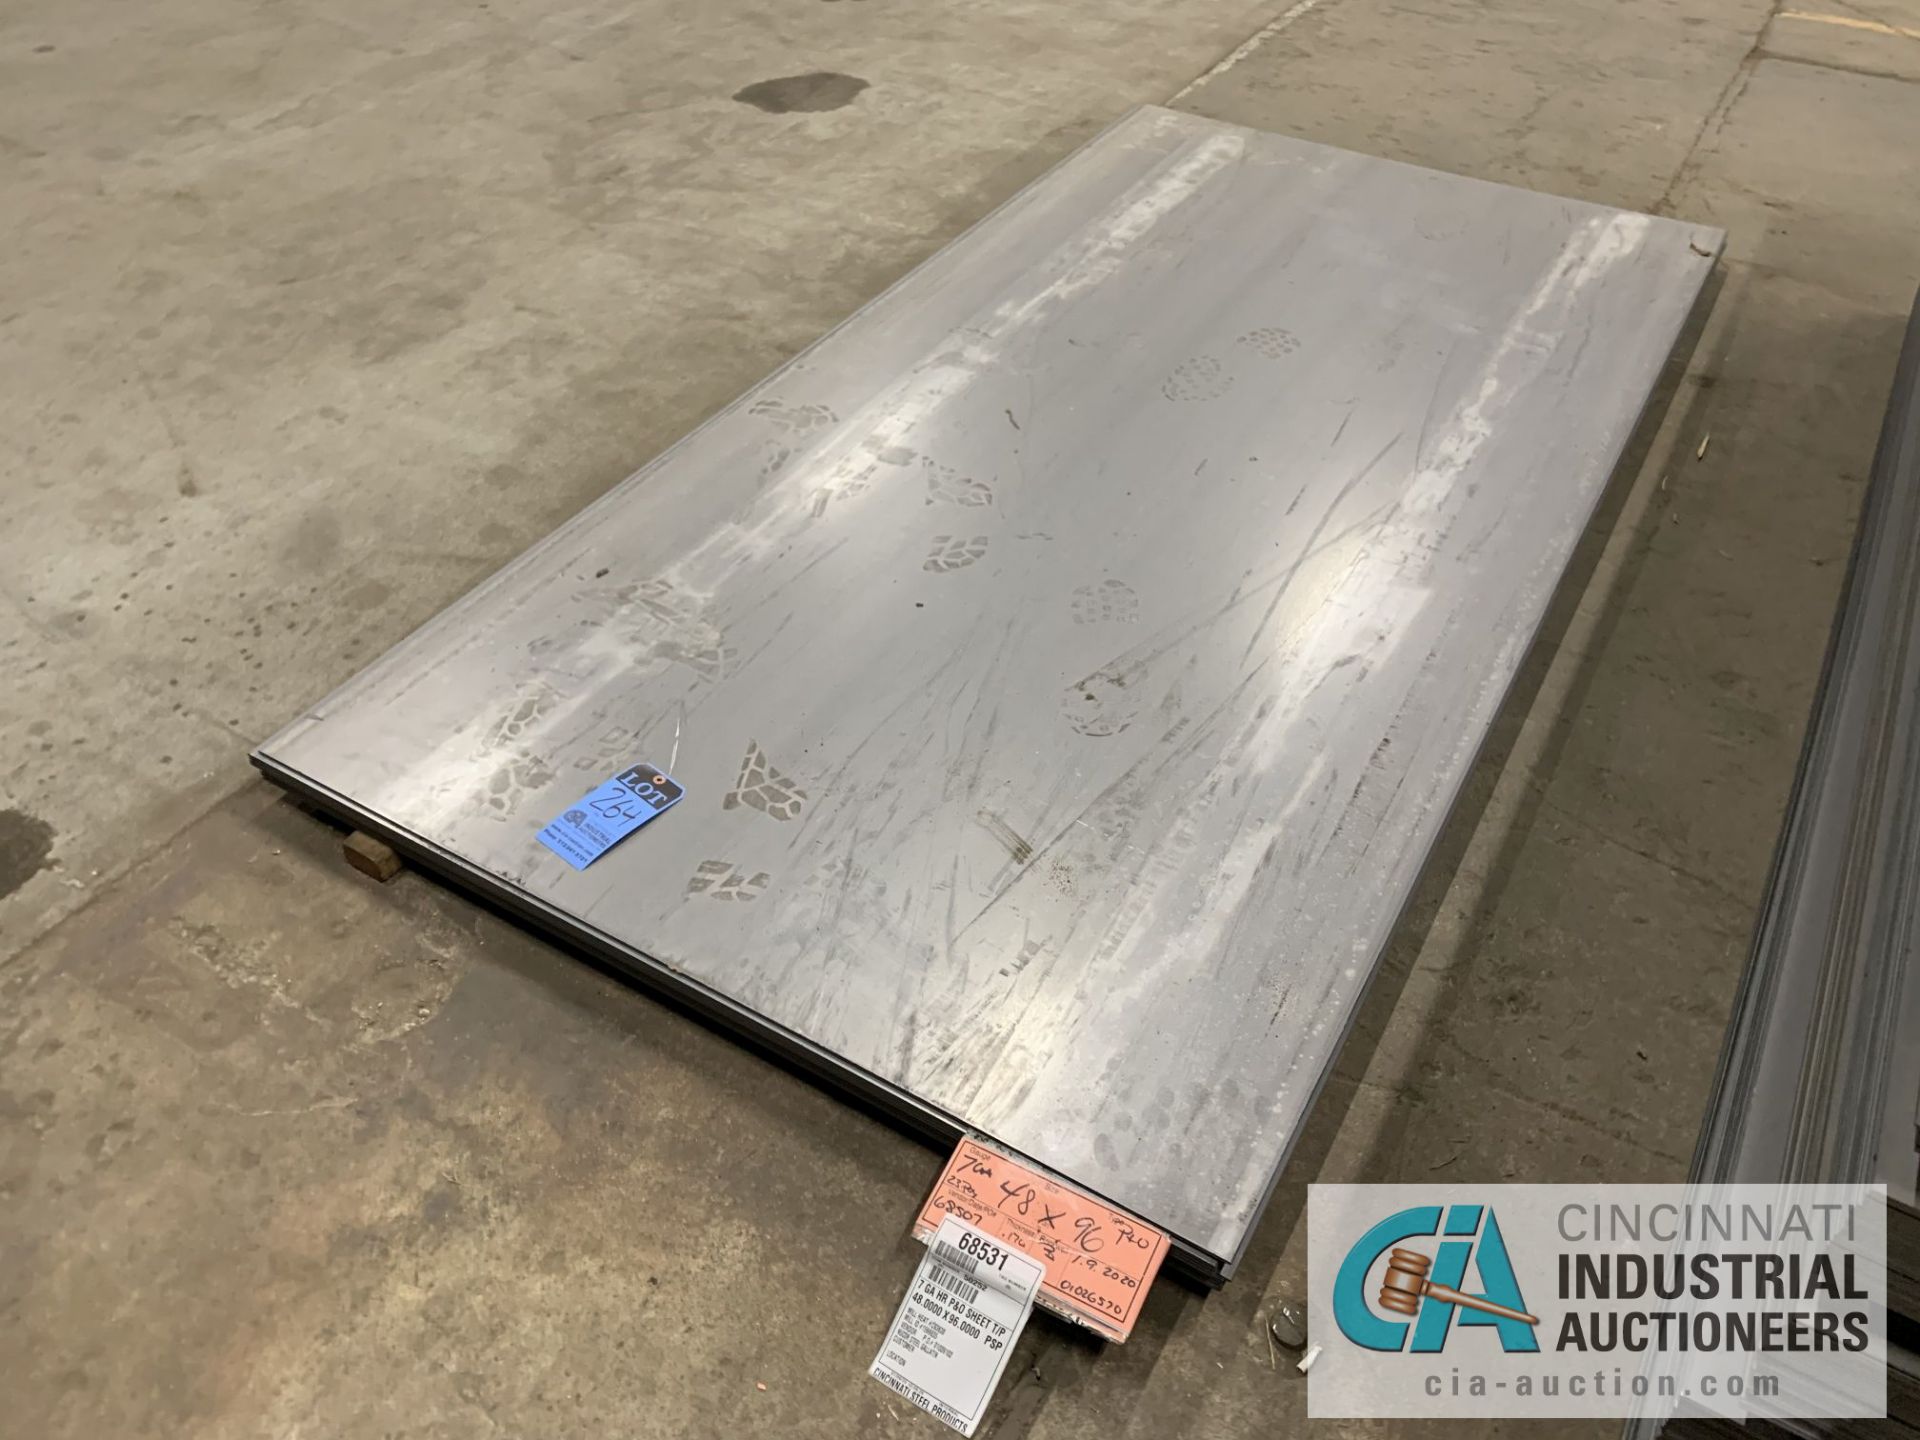 (LOT) APPROX. 2,400 LBS. UNCOATED SHEET STEEL, 1-STACK, 1-BUNDLE, SEE INVENTORY FOR LISTING.